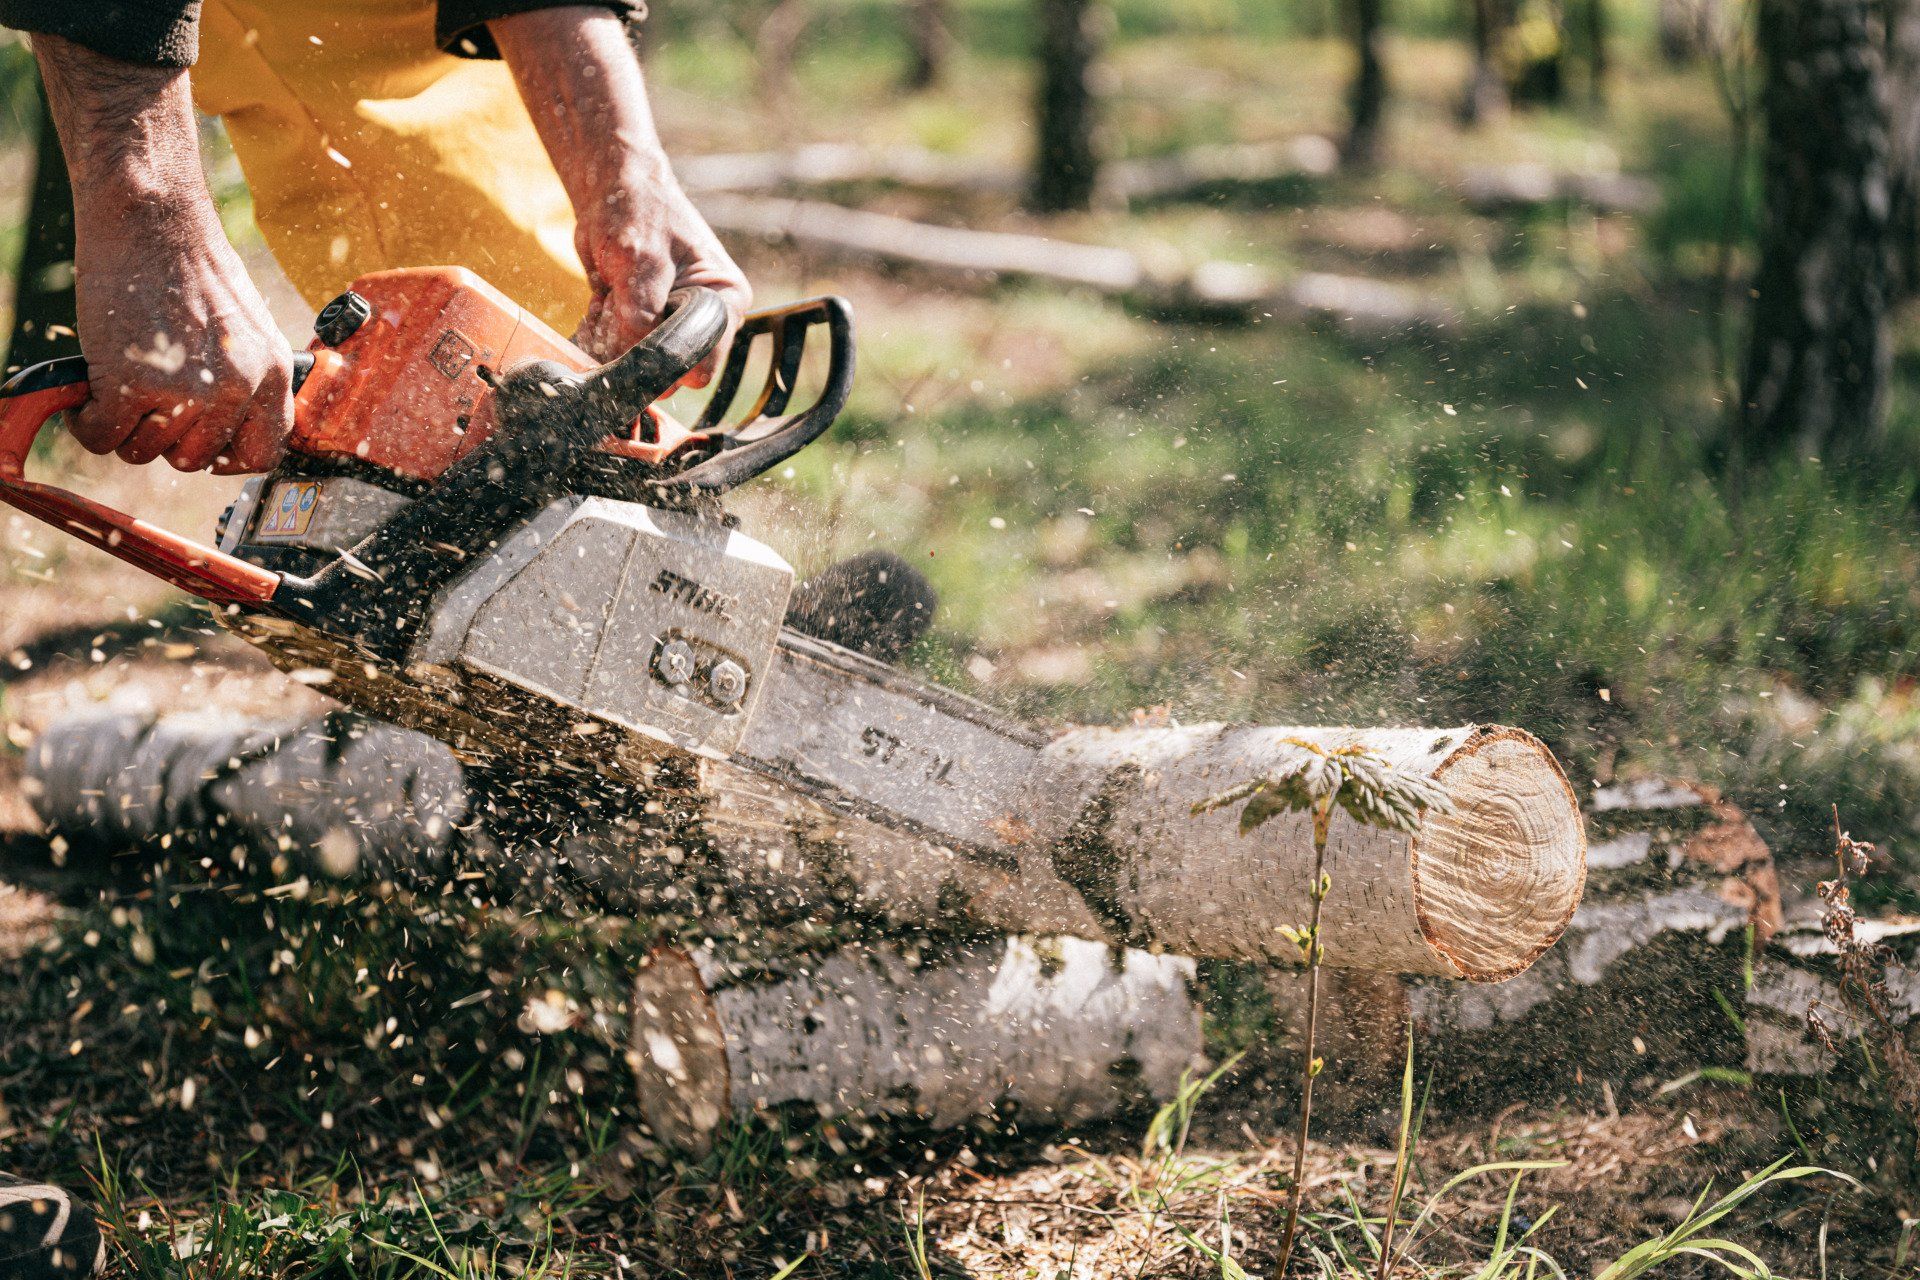 Professional Arborist Provides Tree Services to Rural Property in Perth